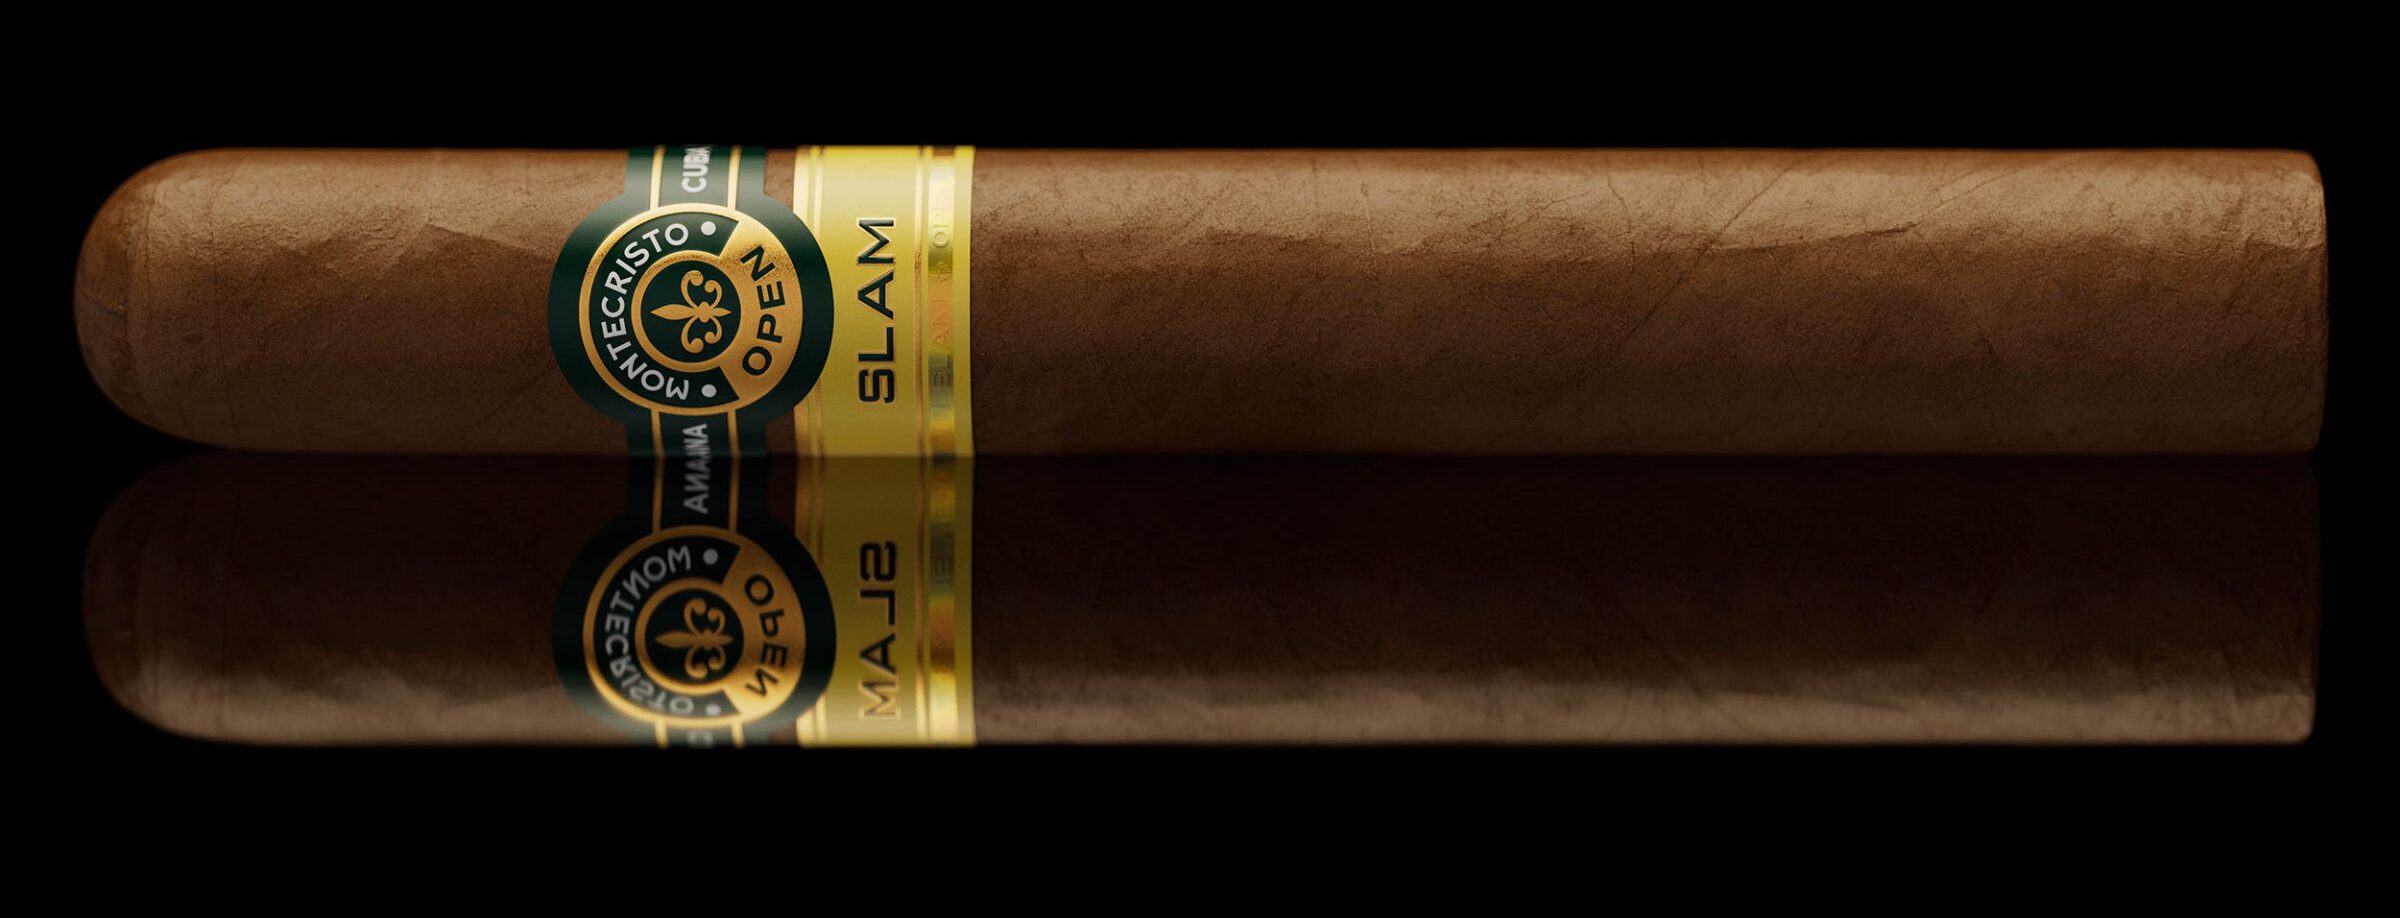 Habanos, S.A. expands Línea Montecristo Open with the launch of the Open Slam vitola